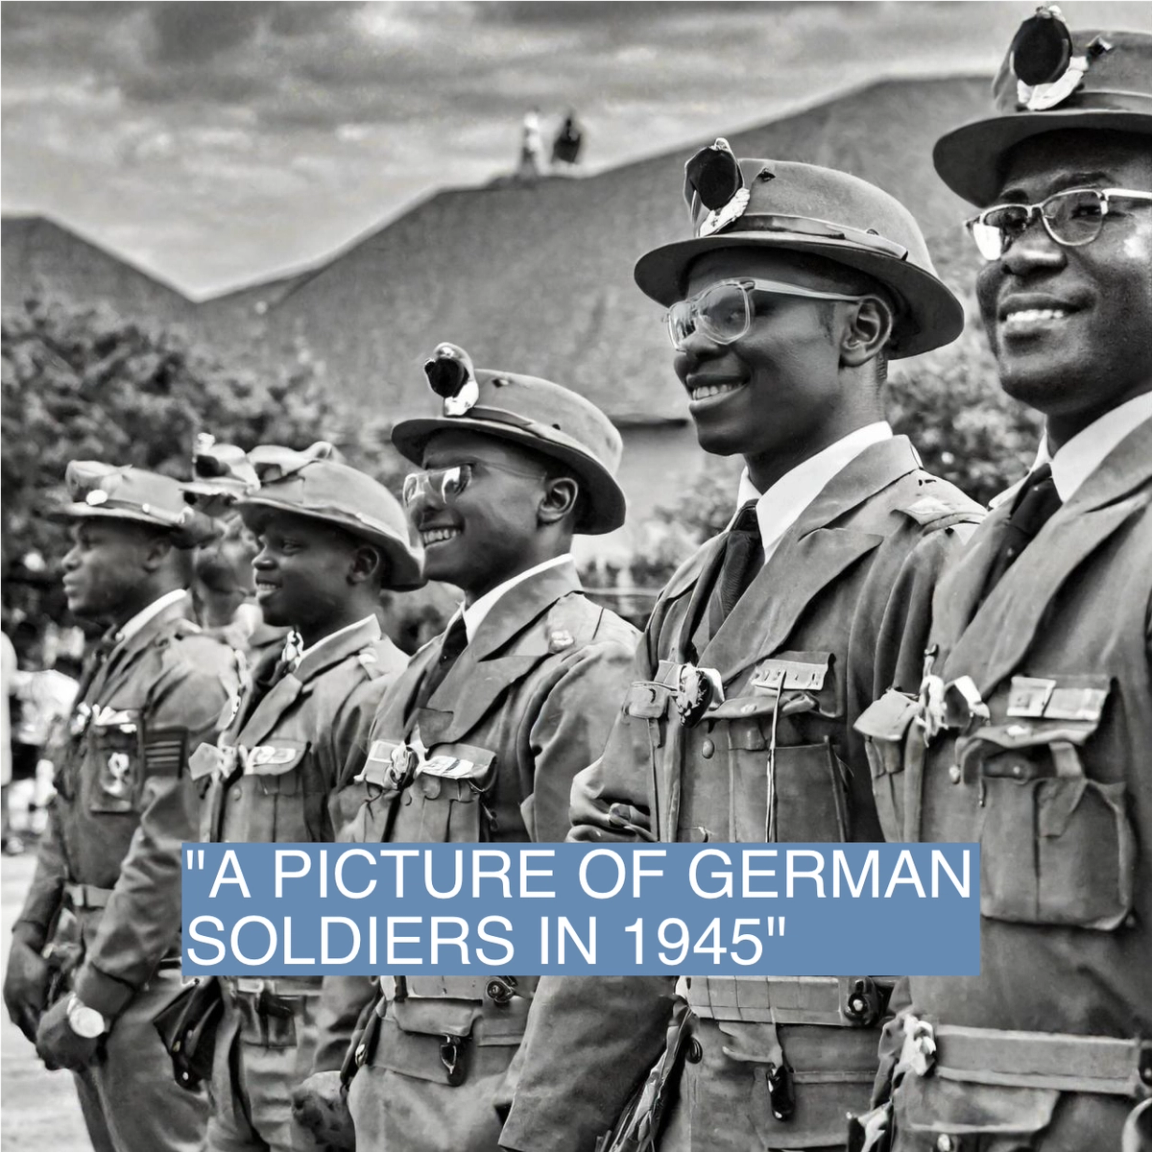 An image Adobe Firefly generated when prompted to make "a picture of German soldiers in 1945."